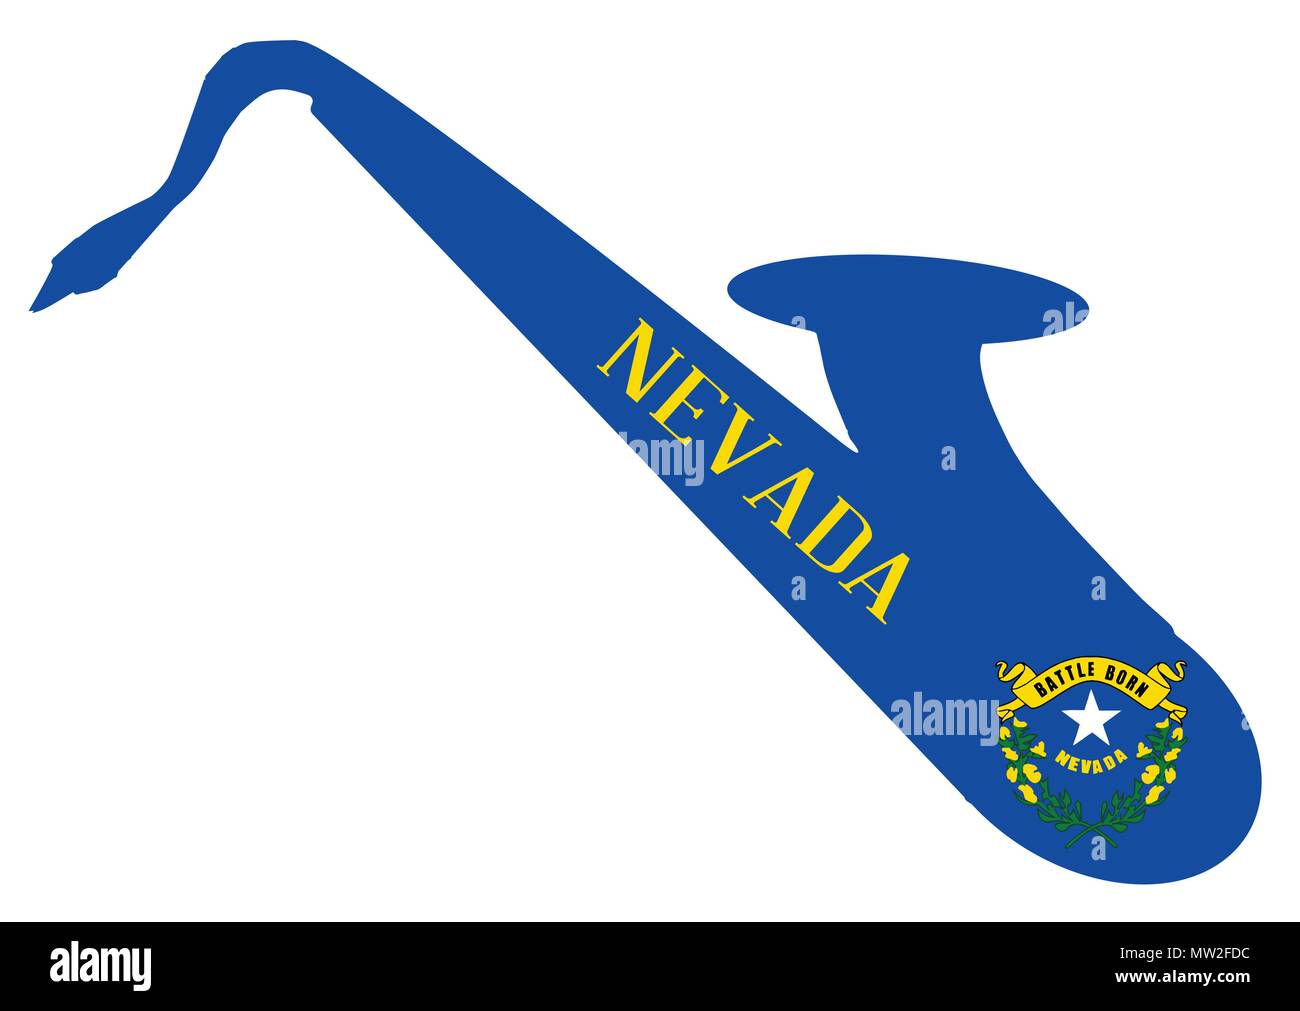 Silhouette of a saxophone with an impression the flag of the USA state of Nevada over a white background Stock Vector